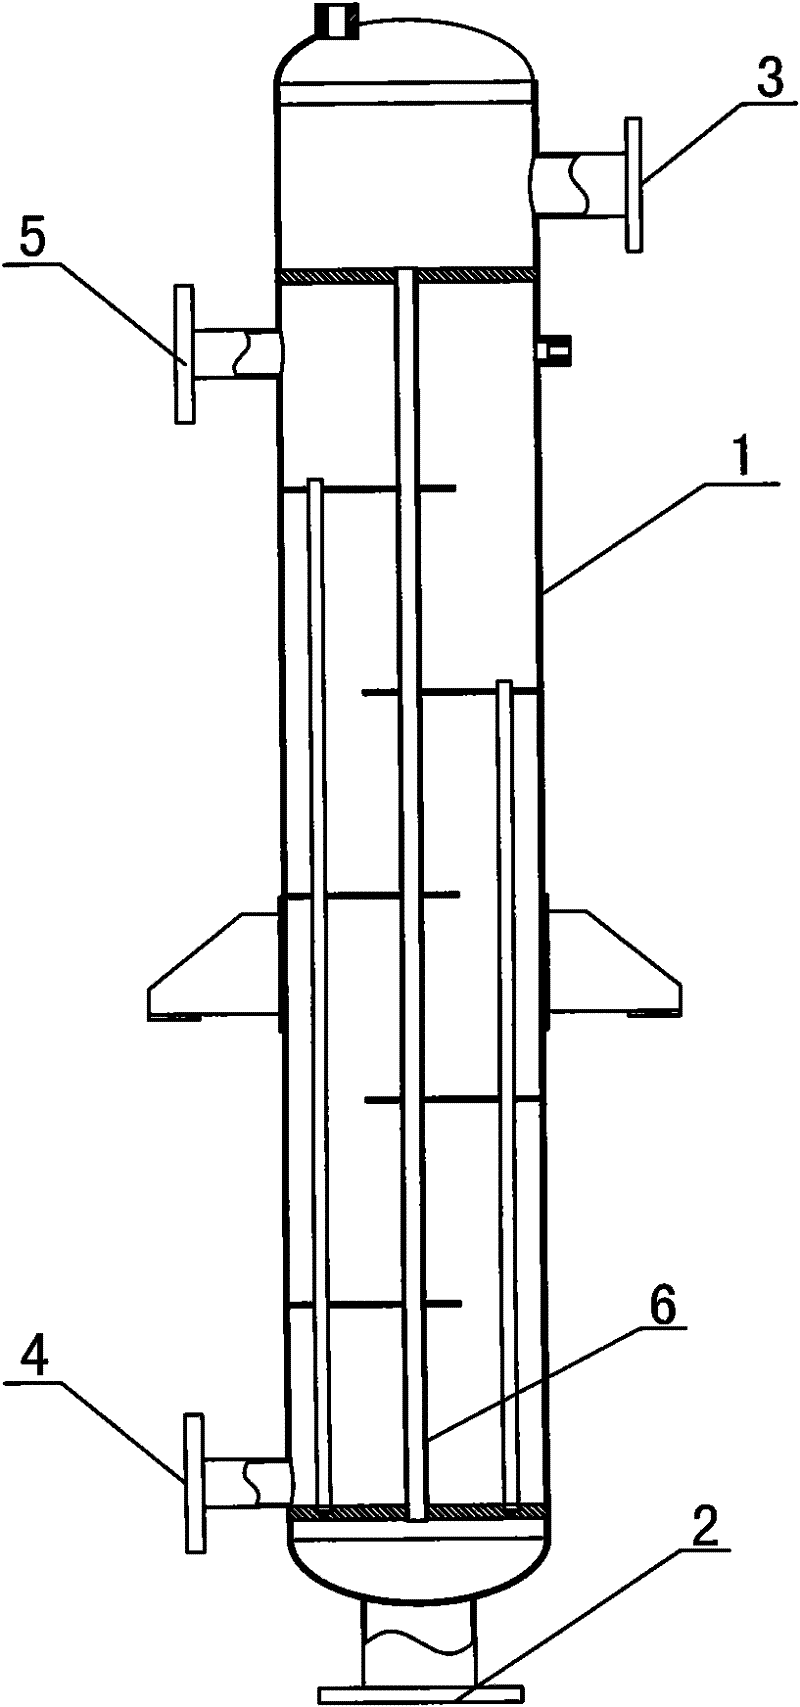 Shunt device of heater